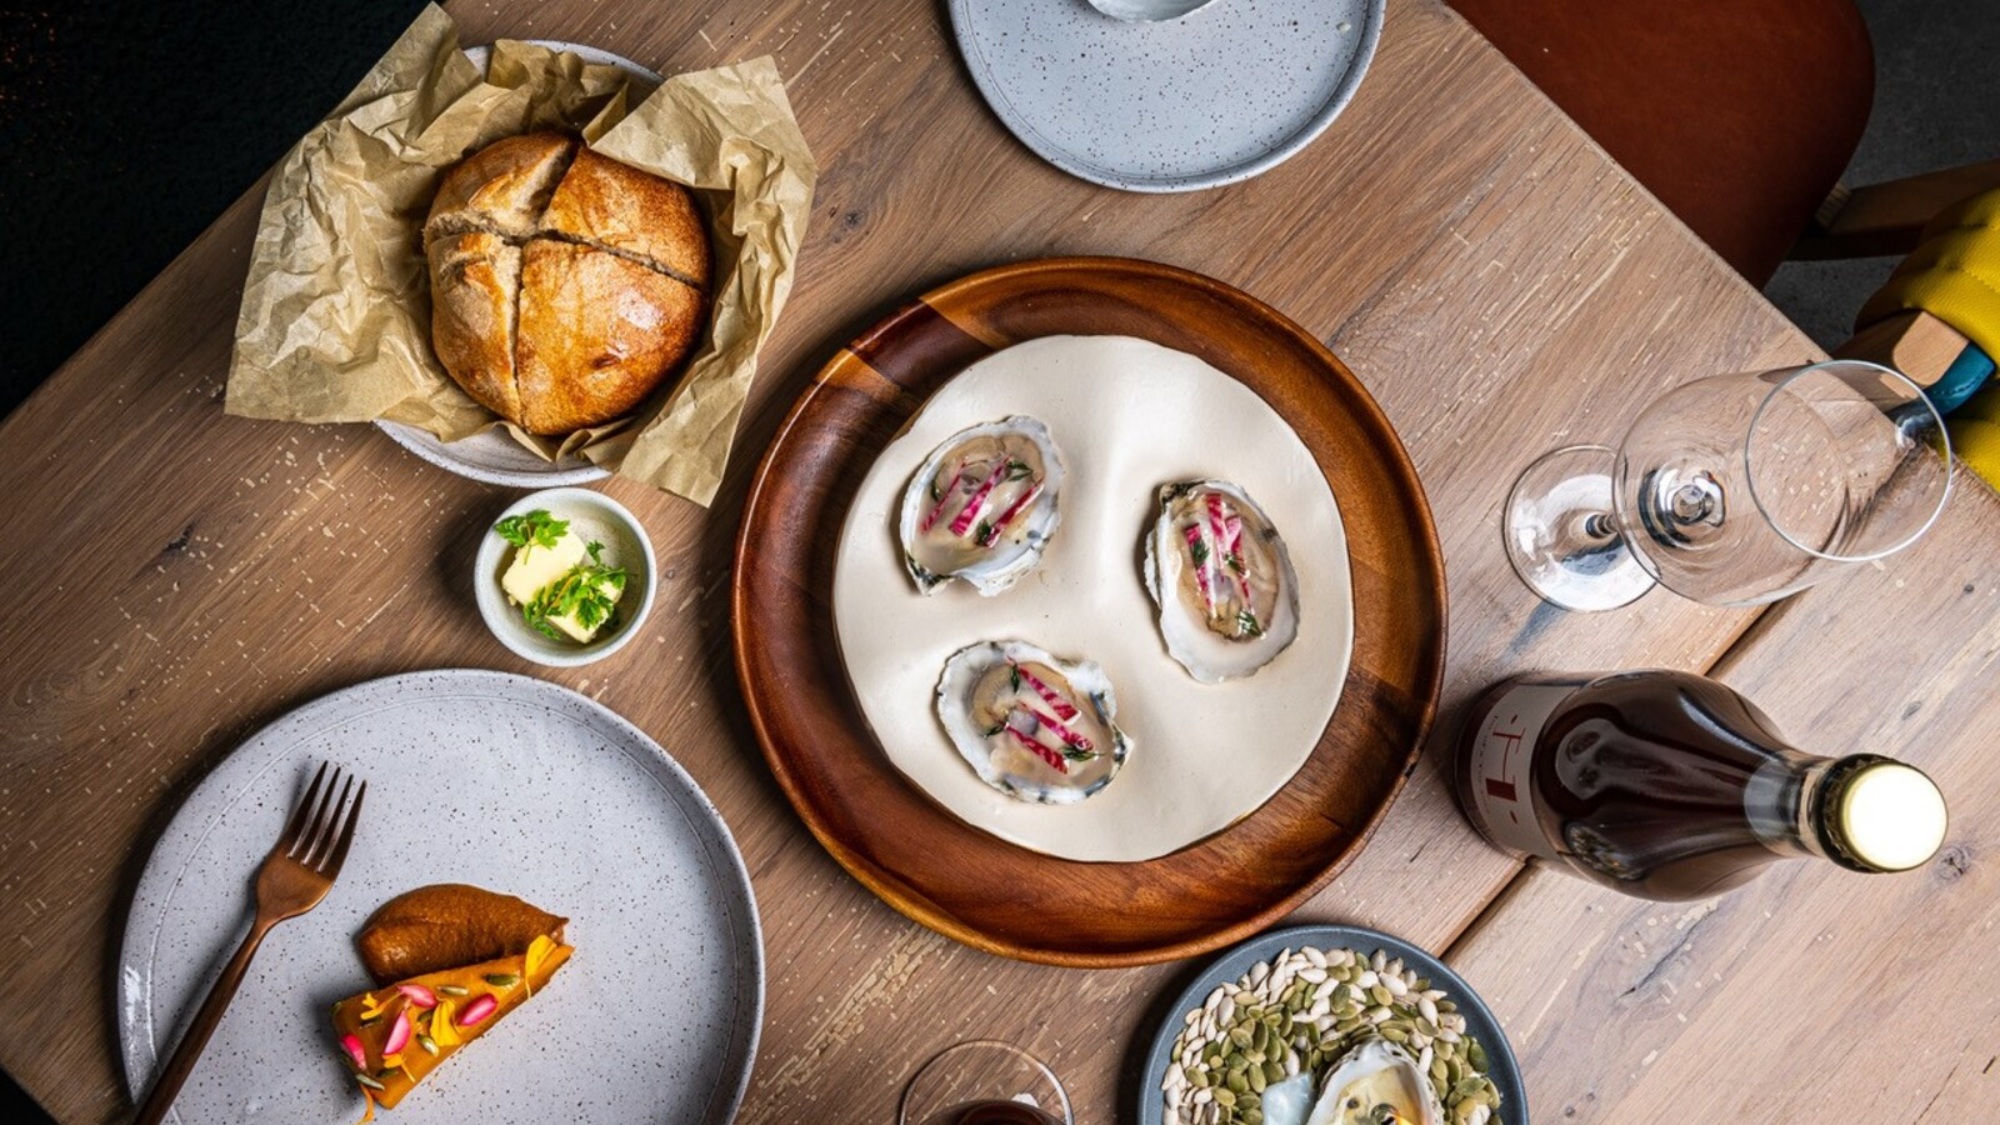 A spread of dishes at Oyster Oyster.